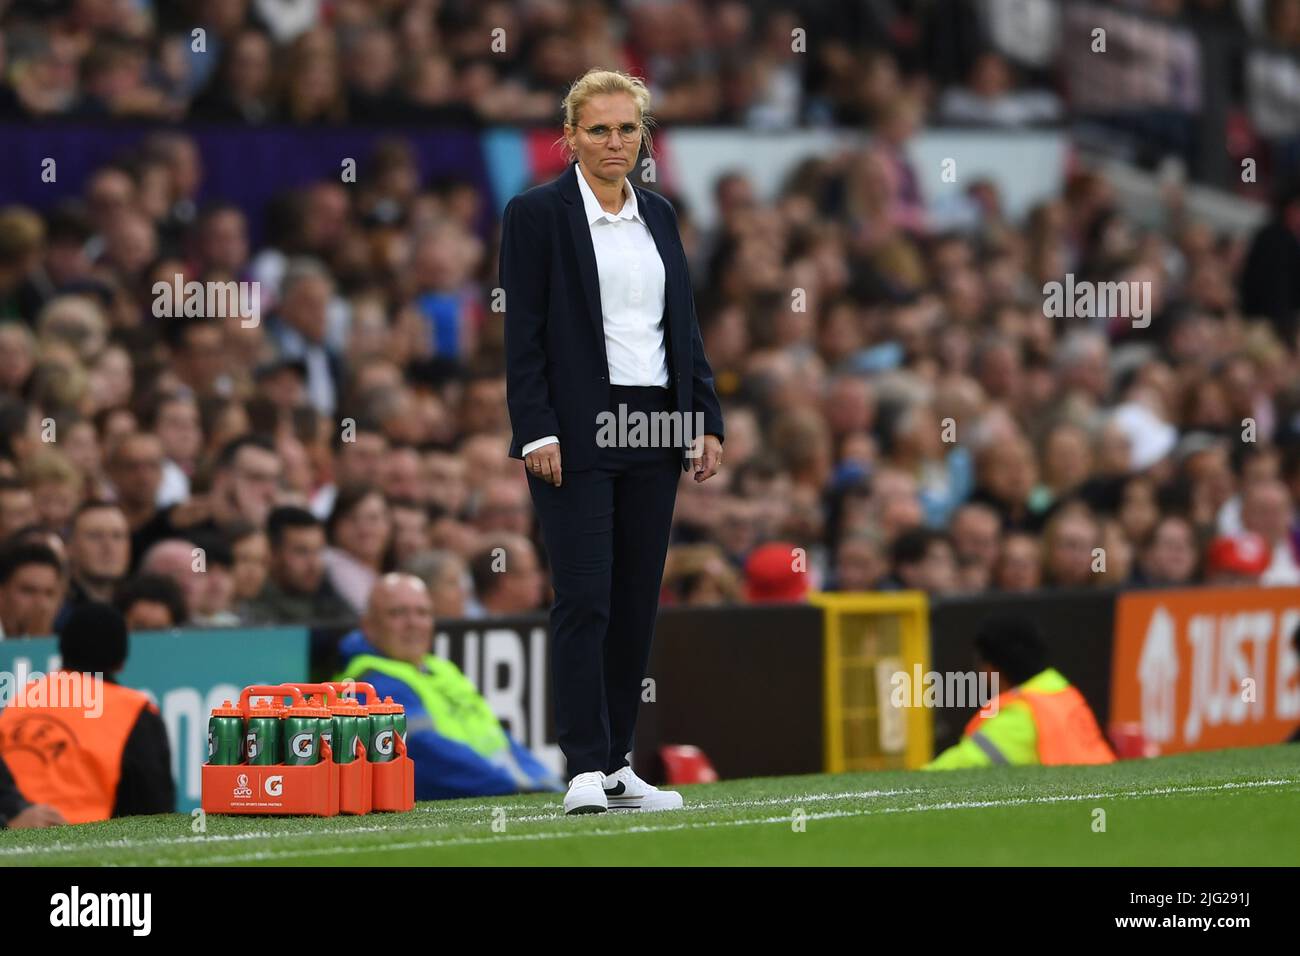 Manchester, UK. 6th July, 2022. Sarina Wiegman Coach (England Women) during the Uefa Women s Euro England 2022 match between England 1-0 Austria at Old Trafford Stadium on July 6, 2022 in Manchester, England. Credit: Maurizio Borsari/AFLO/Alamy Live News Stock Photo